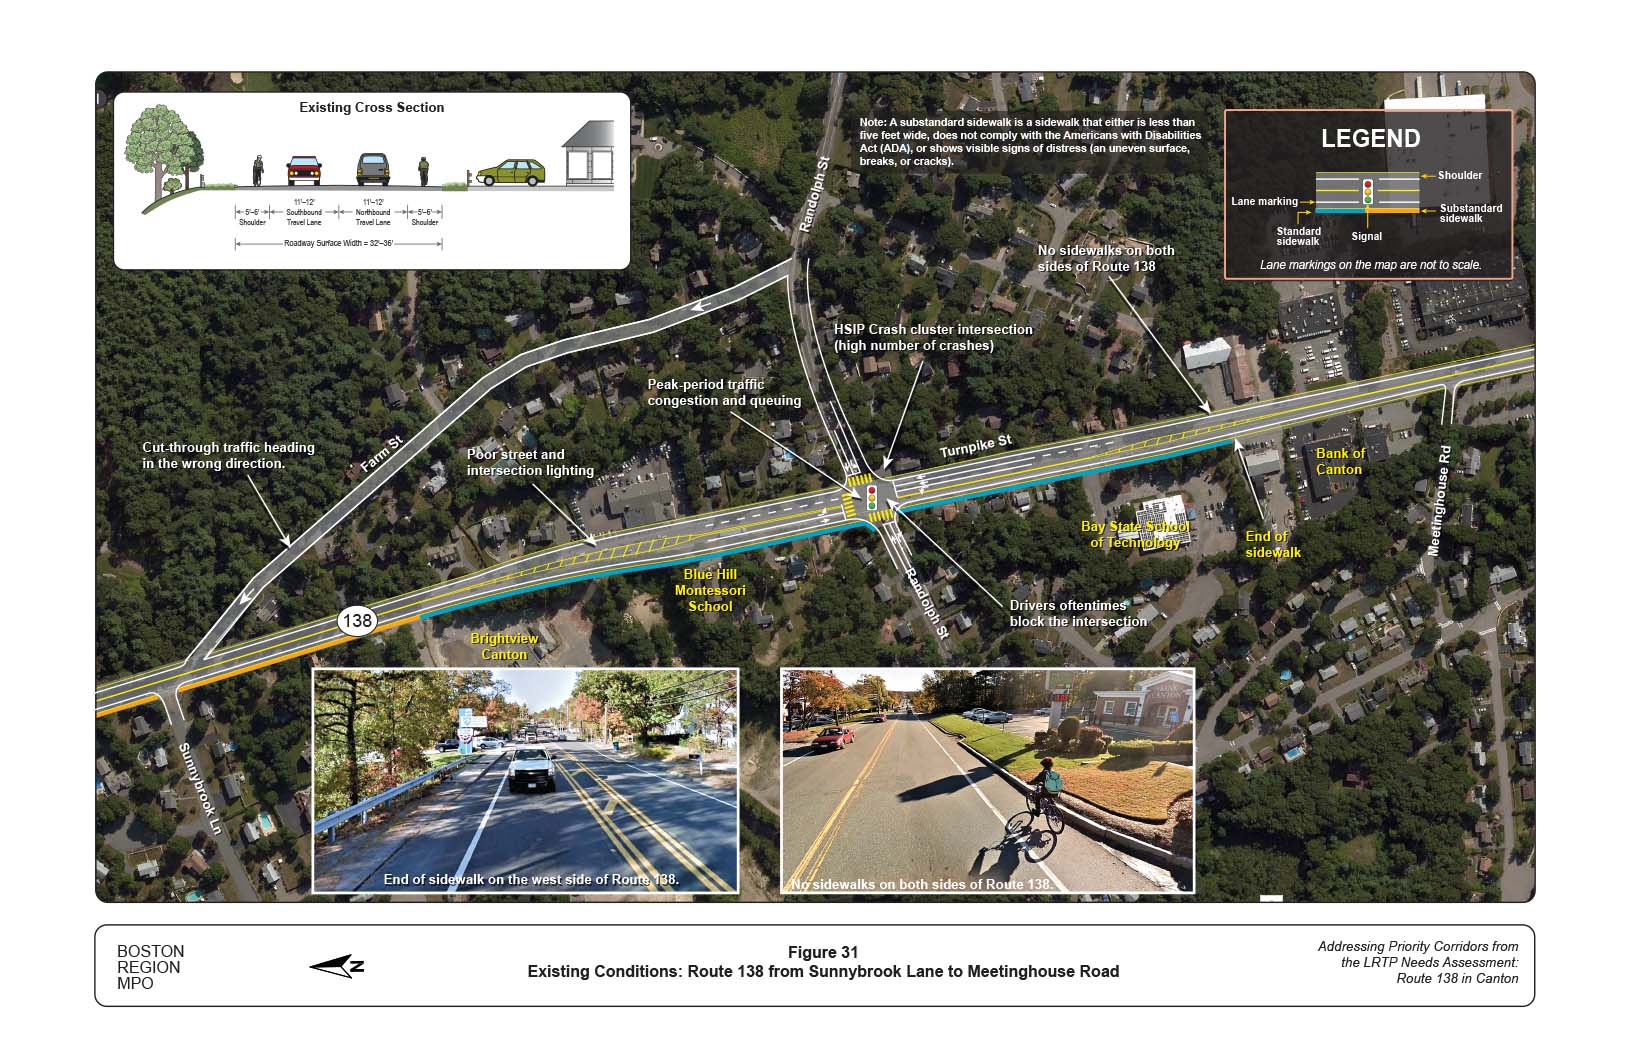 Figure 31 is map of Route 138 at Sunnybrook Lane and Meetinghouse Road with overlays showing the locations of existing problems on the roadway and a graphic of the current cross section of the roadway